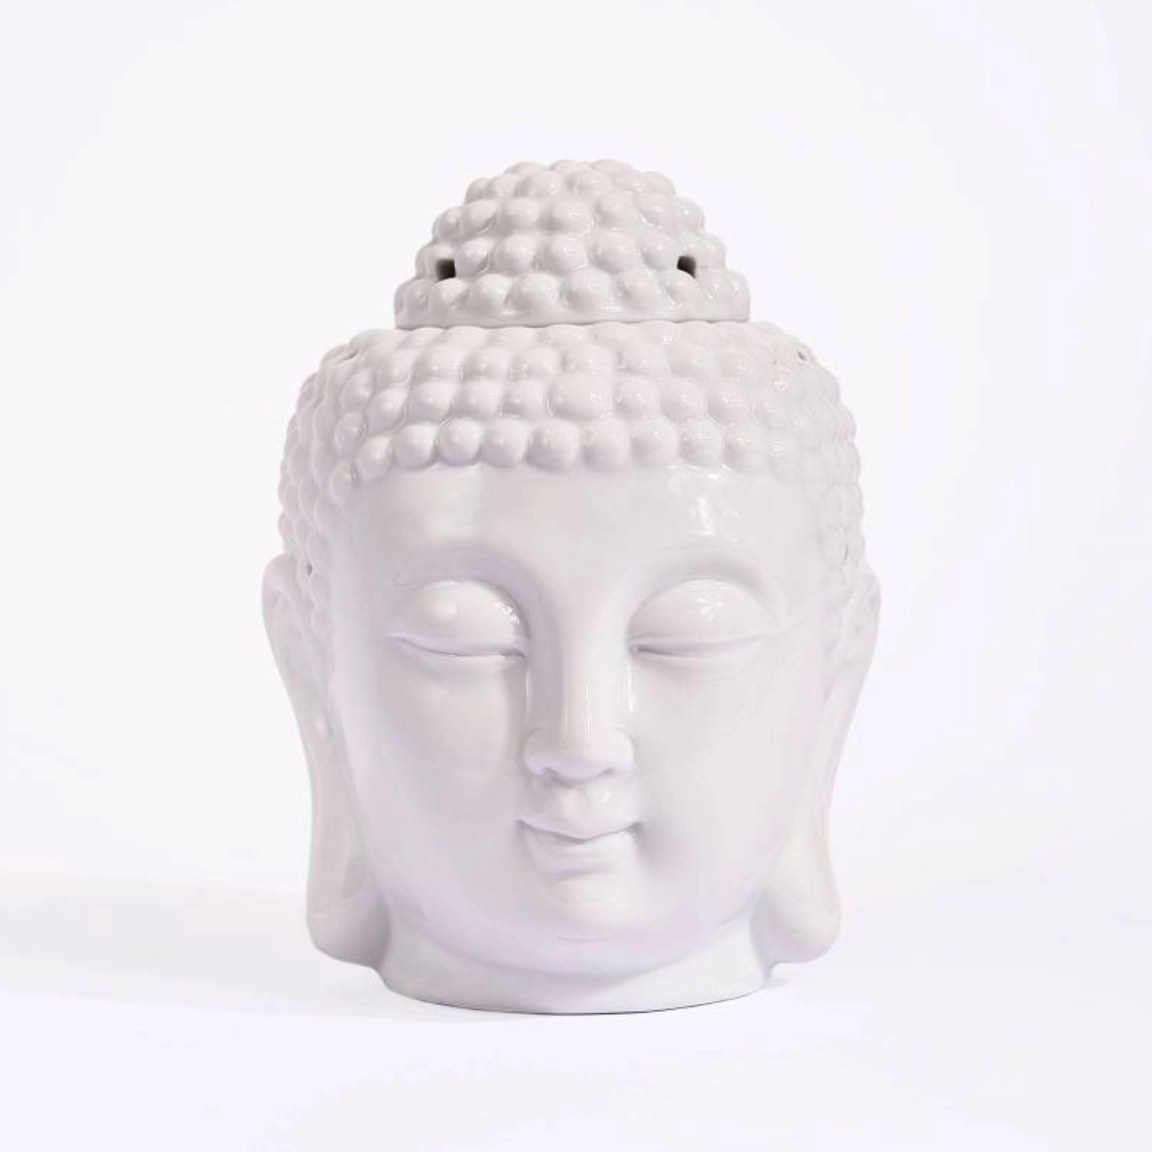 Prince Buddha Burner.  10X15cm.  Surprise, complementary clamshell melt with your purchase.